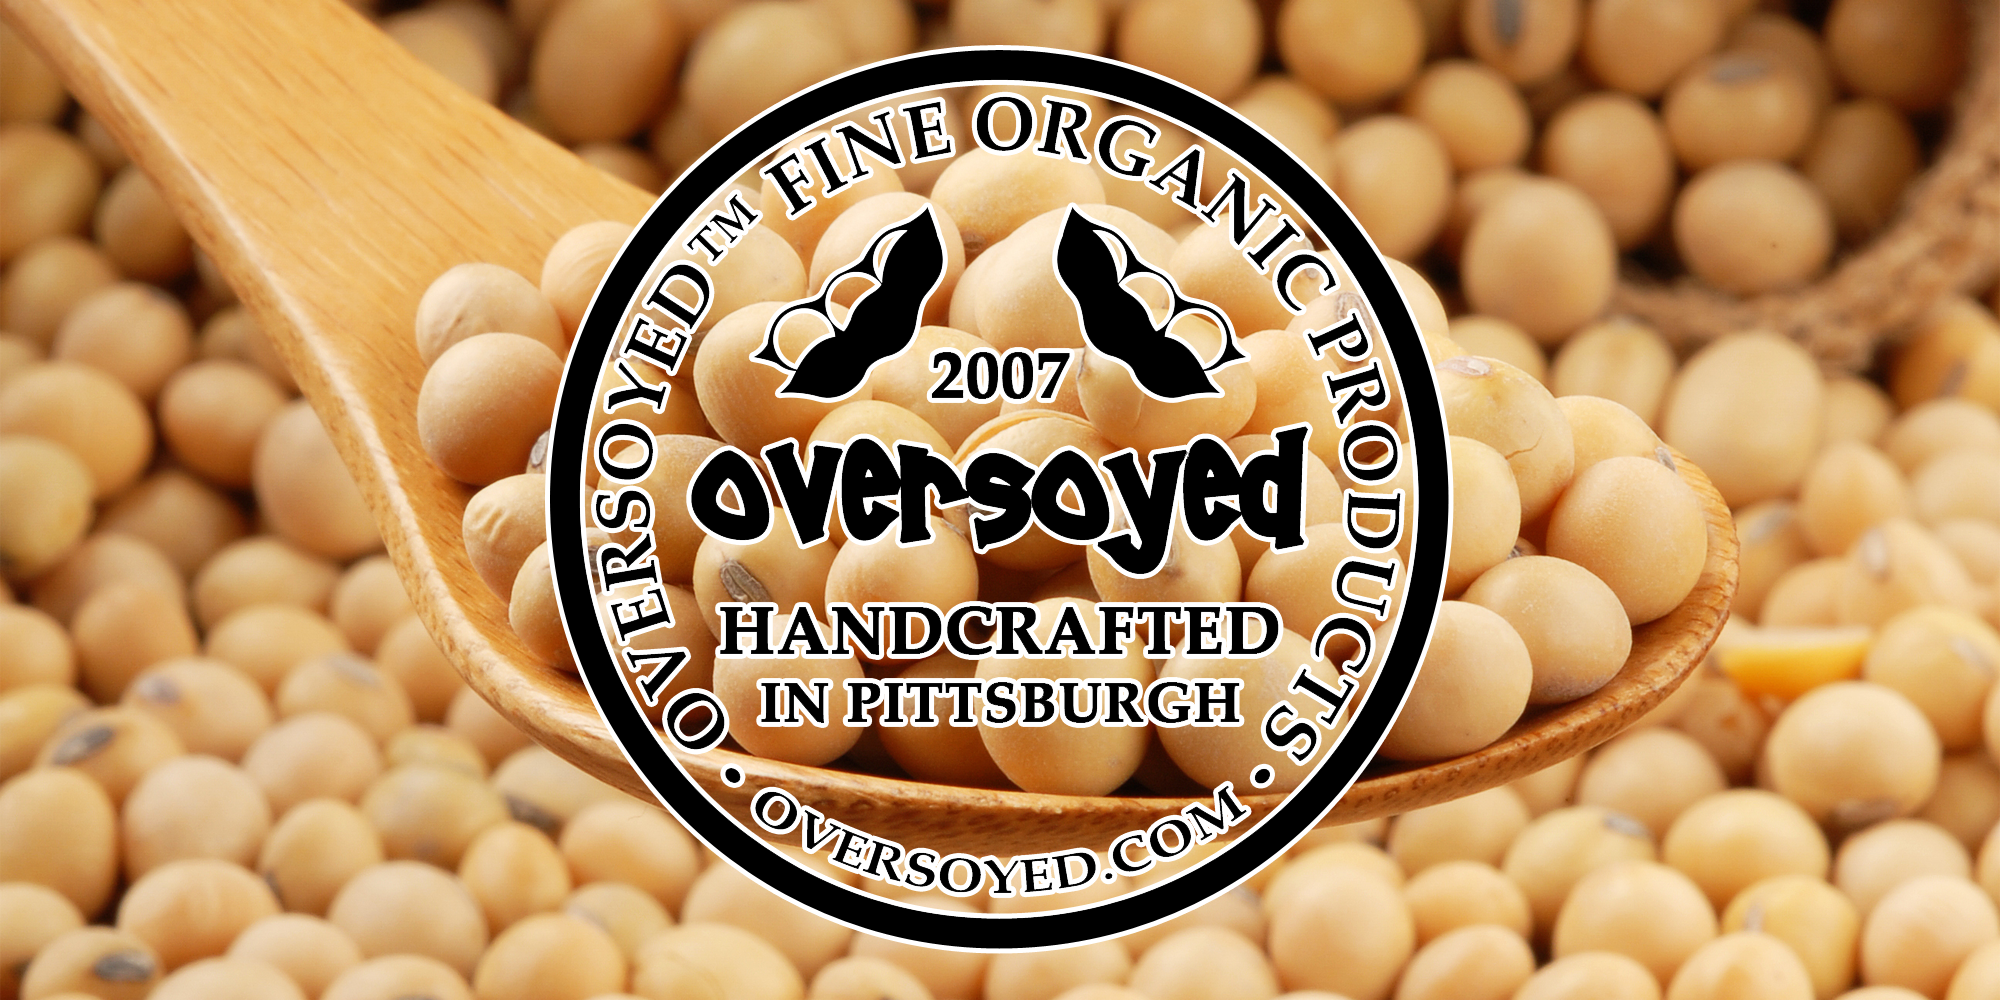 OverSoyed Fine Organic Products - Company History & Vision For The Future